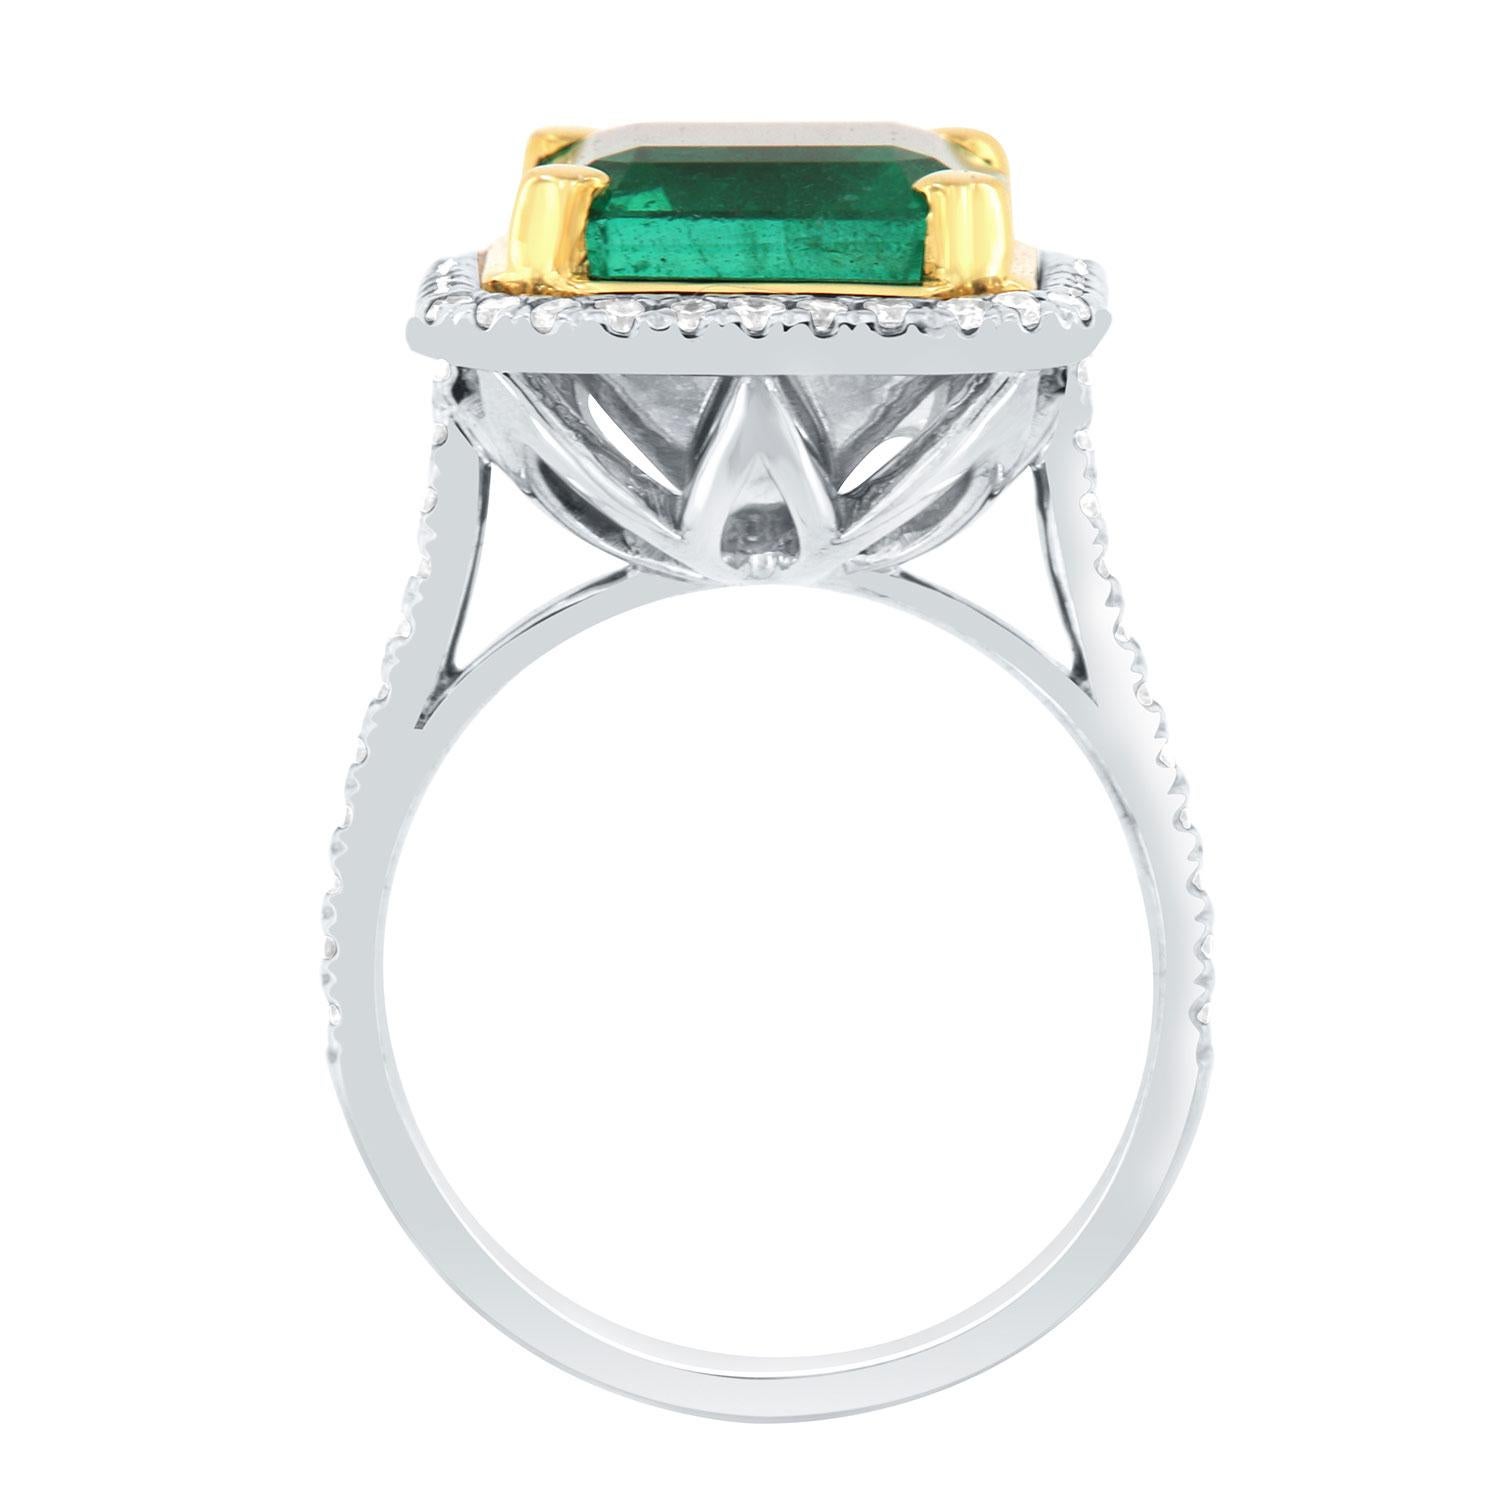 Asscher Cut GIA Certified 6.09 Carat Green Emerald 18k White & Yellow Gold Halo Diamond Ring For Sale